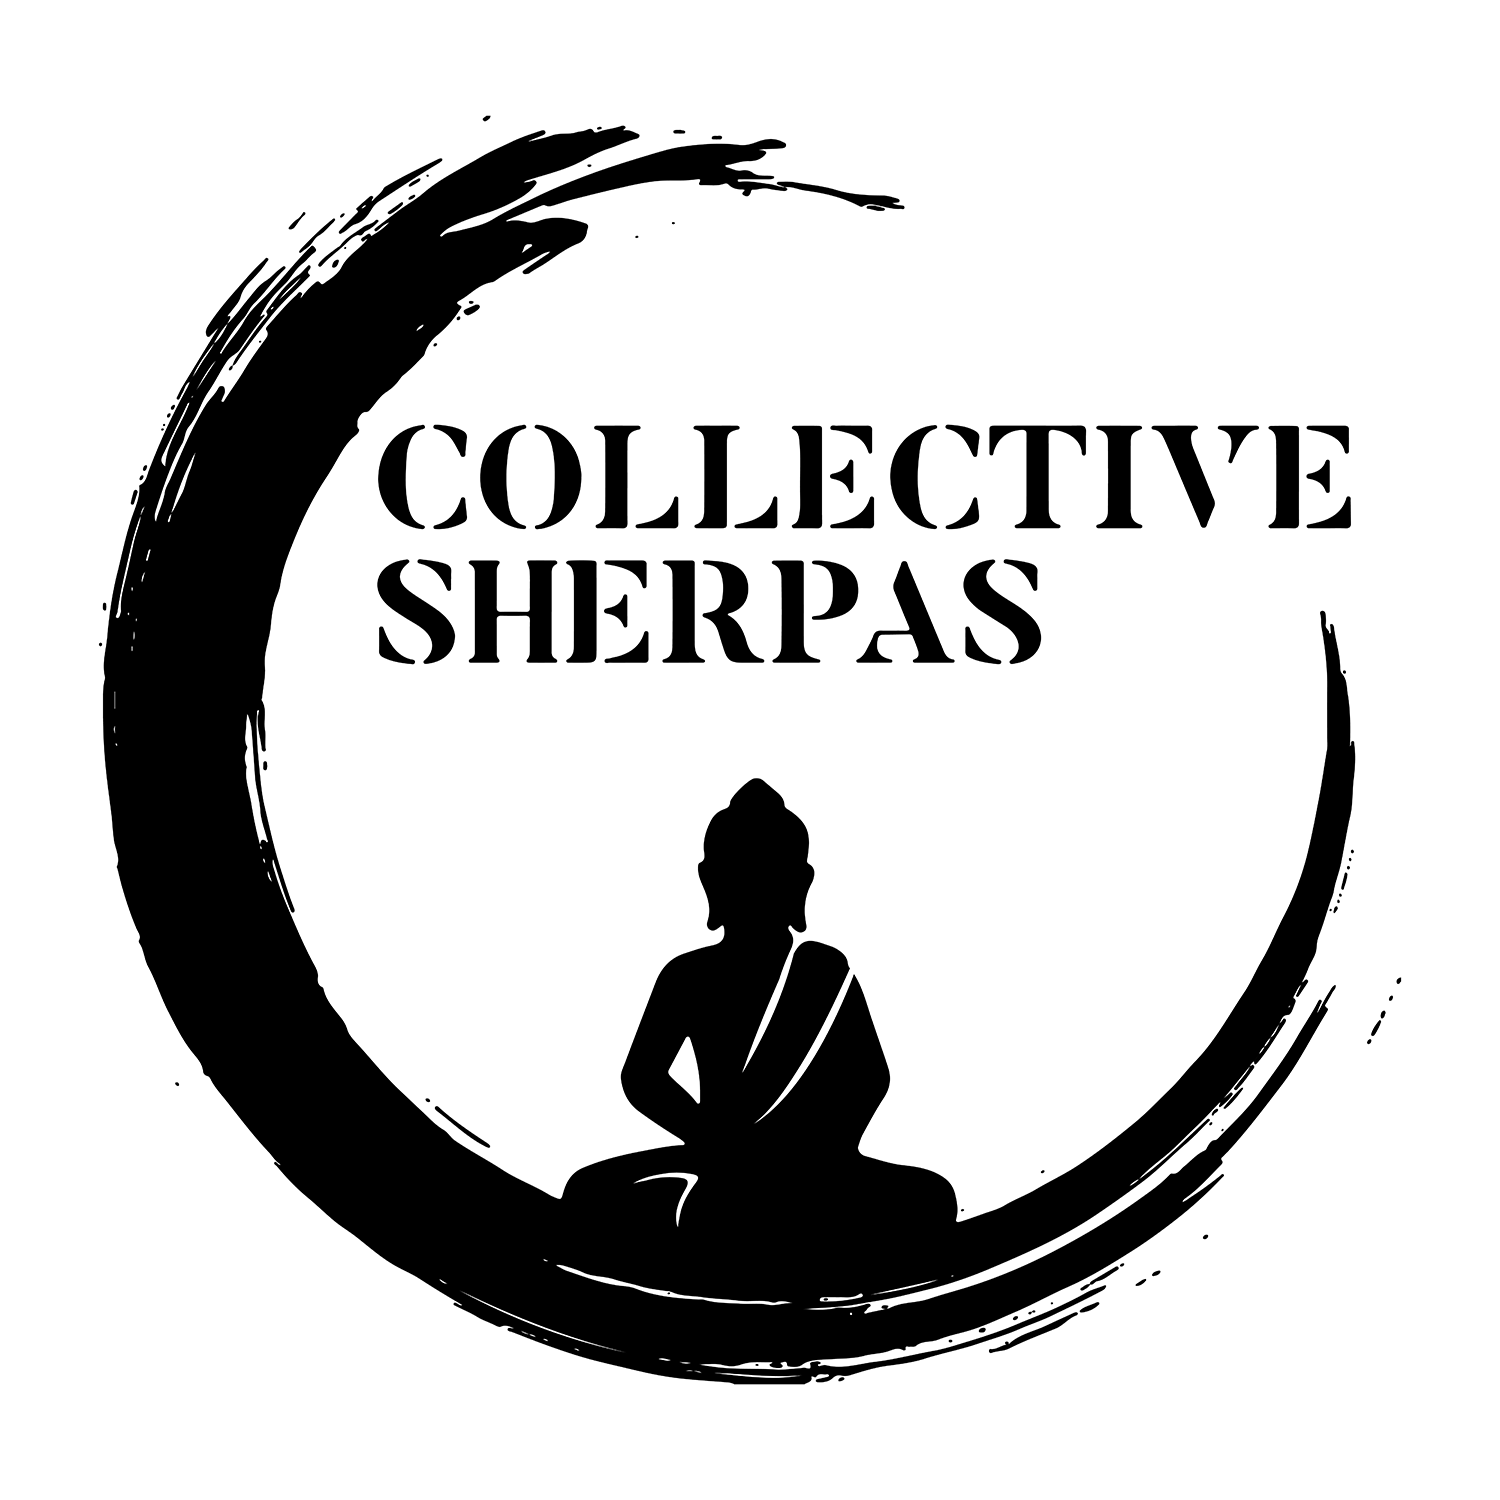 Collective Sherpas